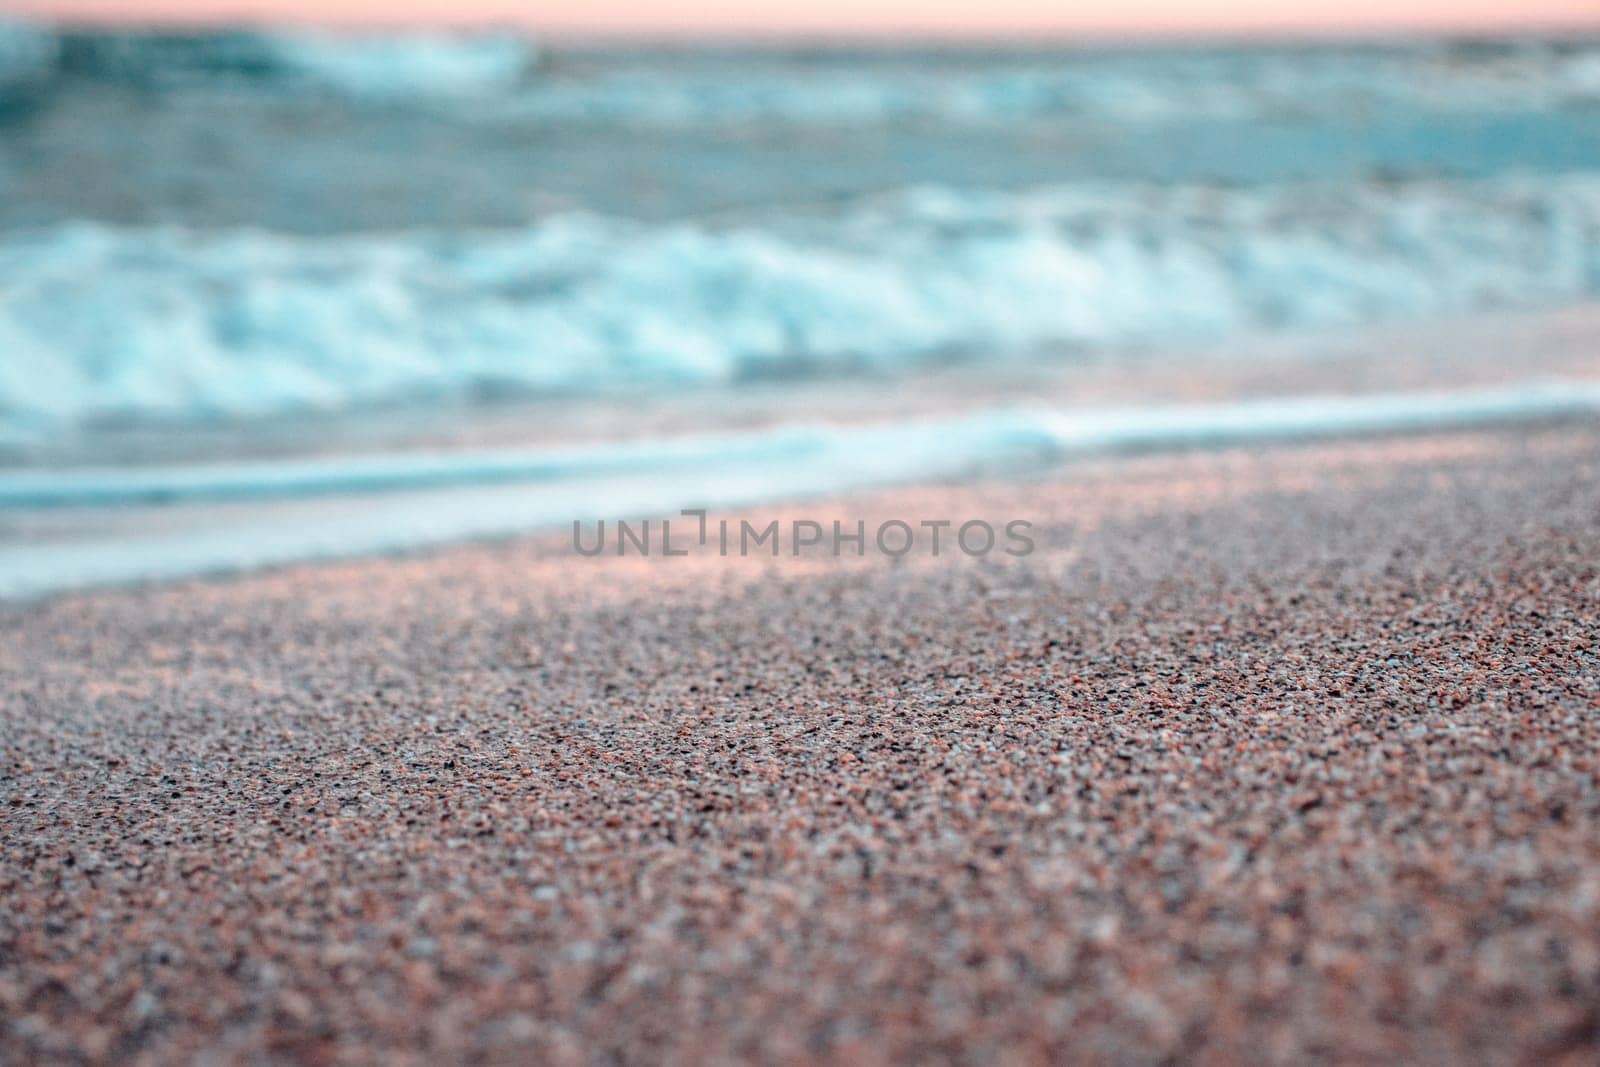 Close up sand beach and ocean waves concept photo. Barcelona resort, blue sea. Front view photography with blurred background. High quality picture for wallpaper